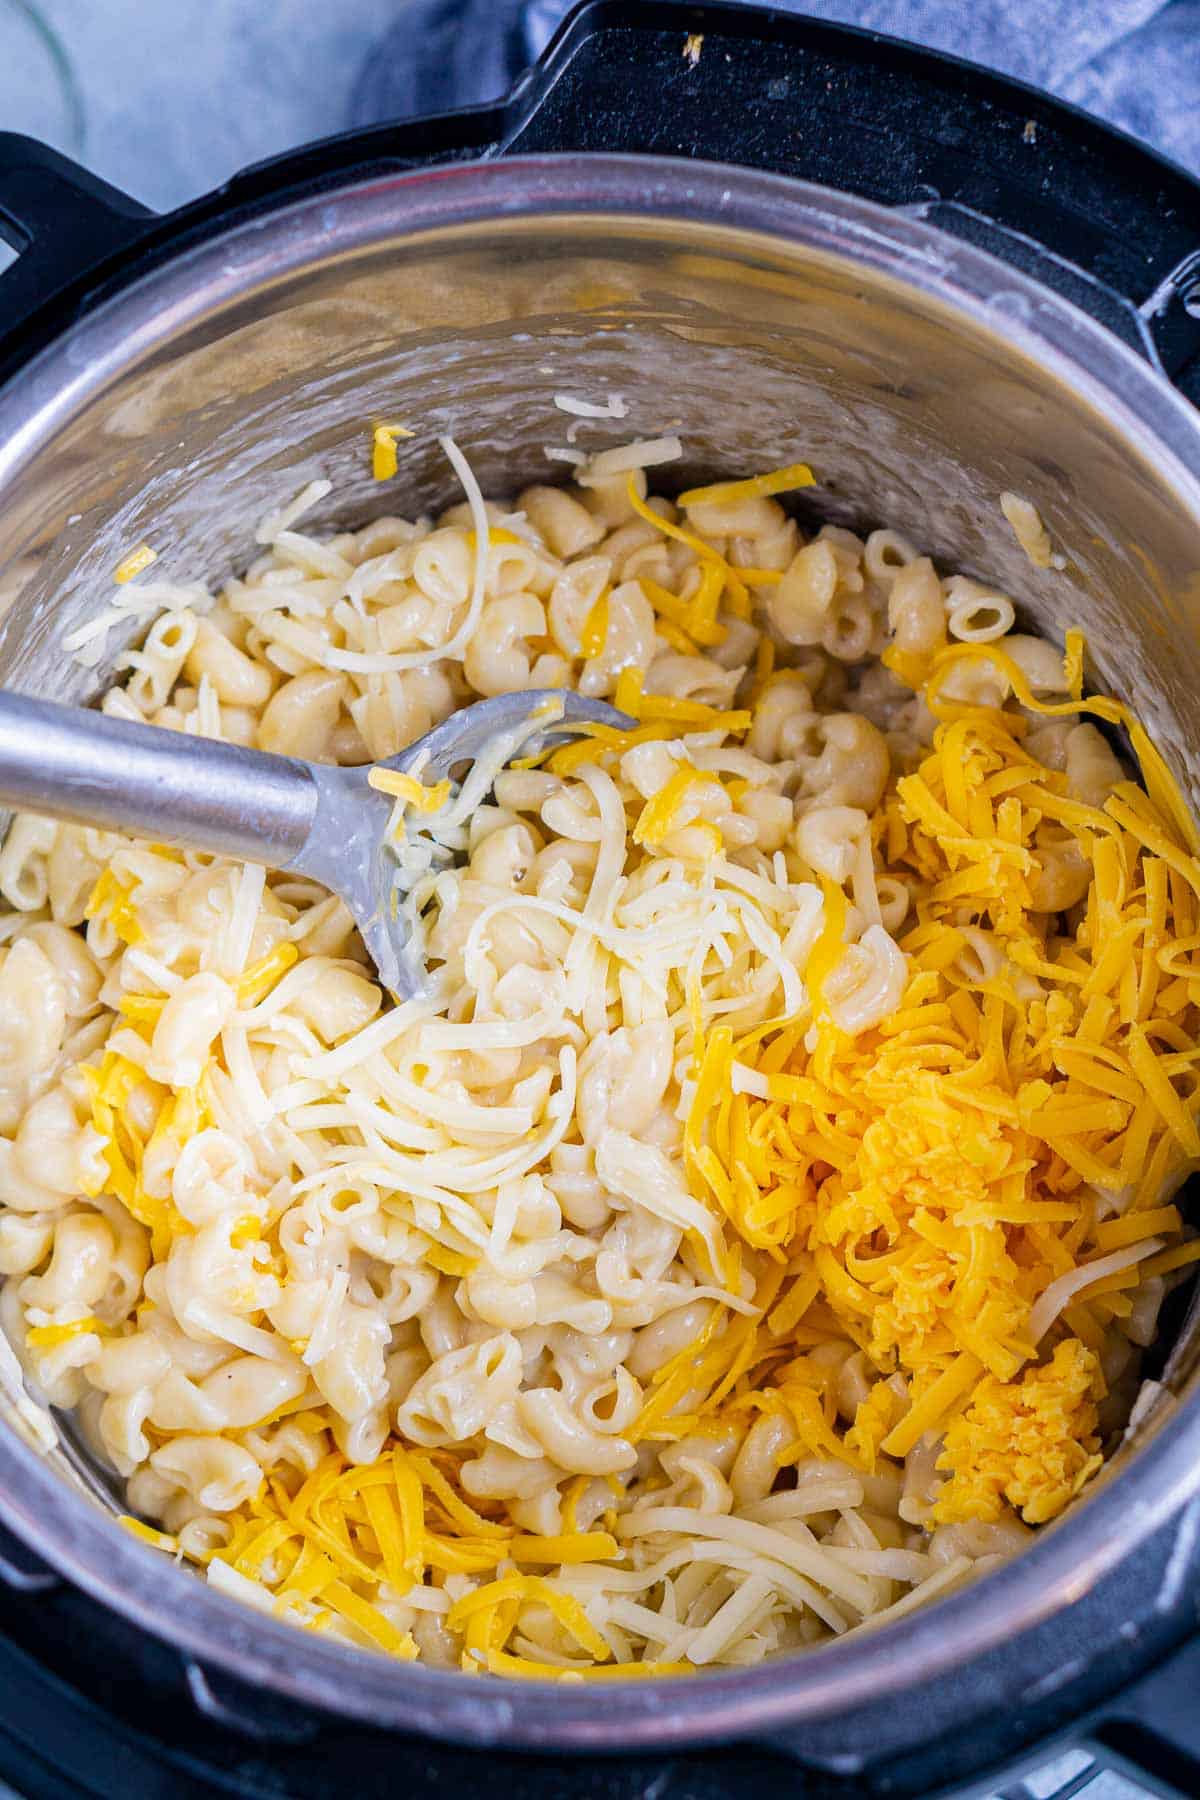 spoon stirs shredded cheese into macaroni noodles in Instant Pot